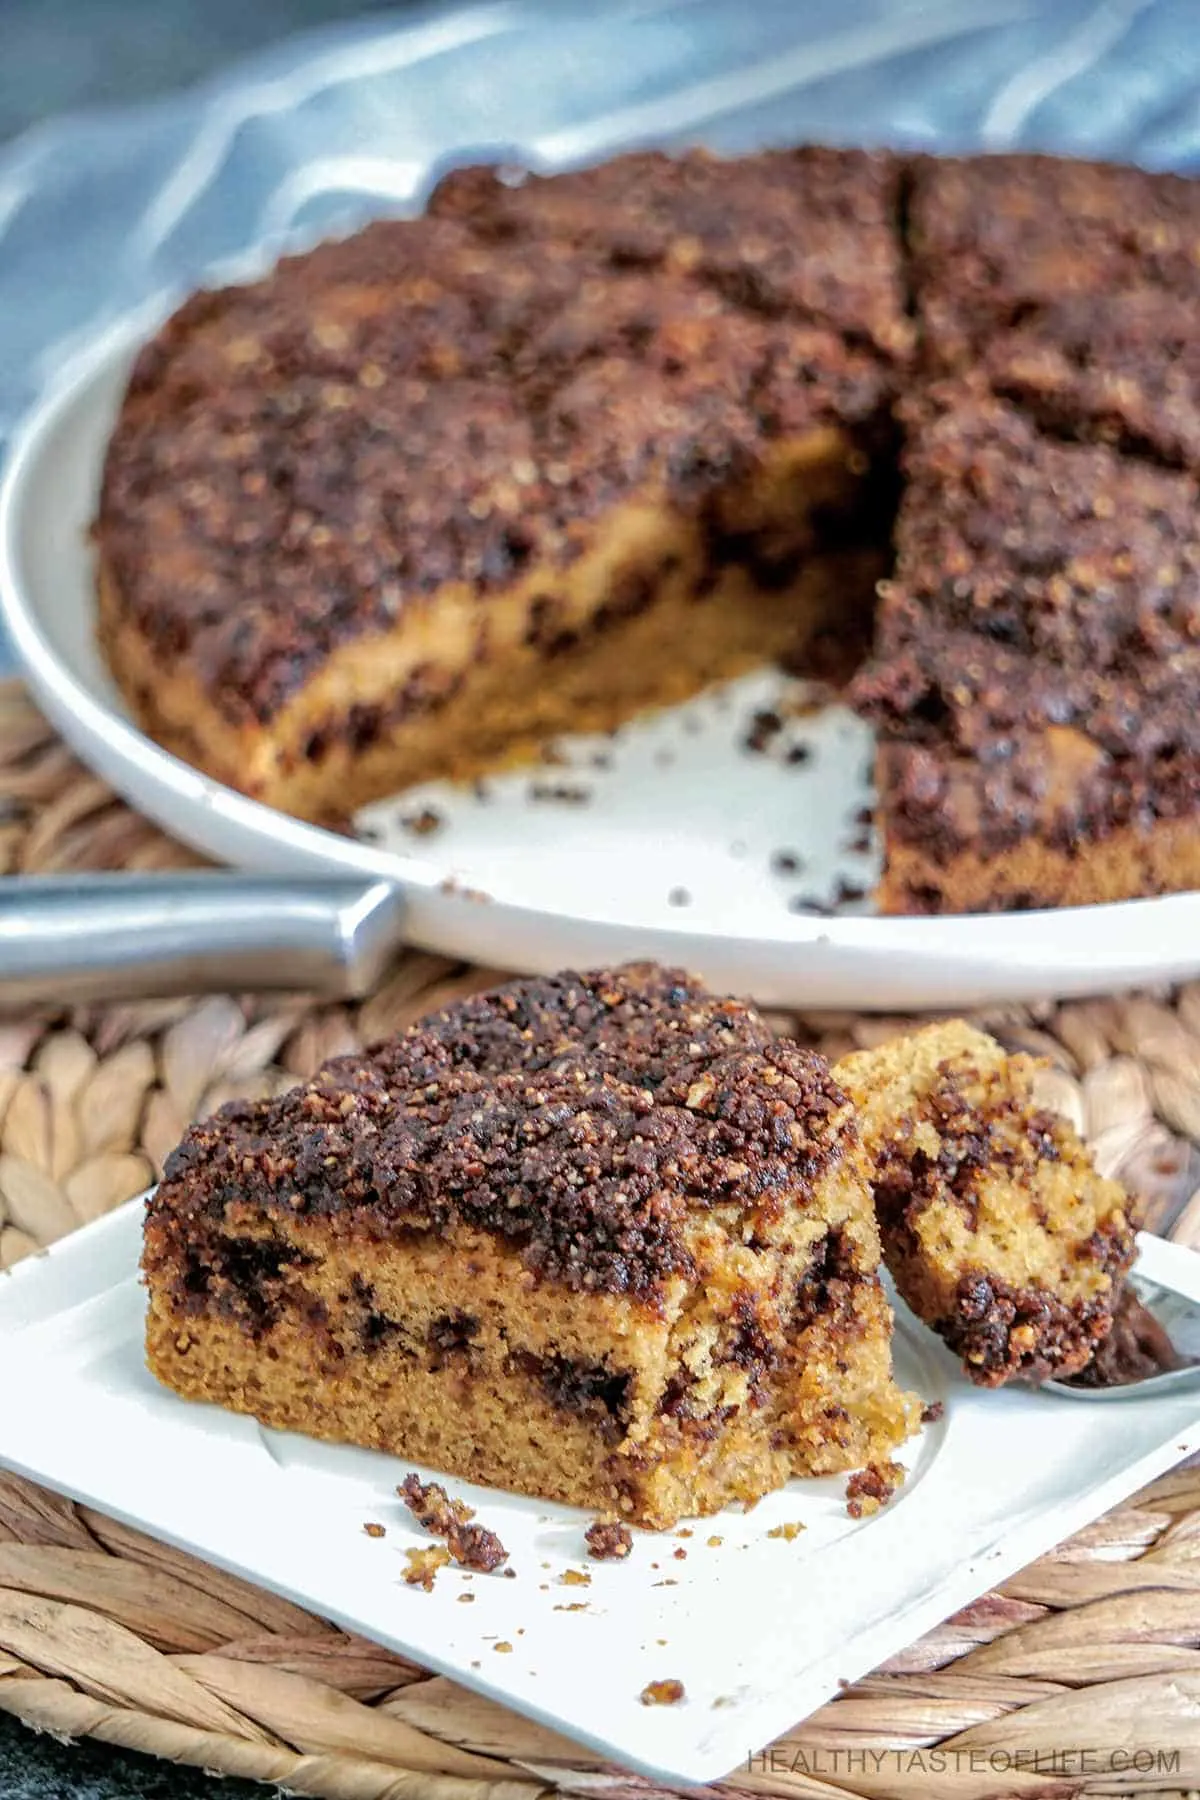 A soft gluten free coffee cake with coffee, cinnamon and walnut topping (streusel) and middle layer. This easy cinnamon streusel coffee cake is ready in 1 hour and tastes great for several days, freezer friendly too. #glutenfreecoffeecake #easy #healthy #coffeecake #glutenfree